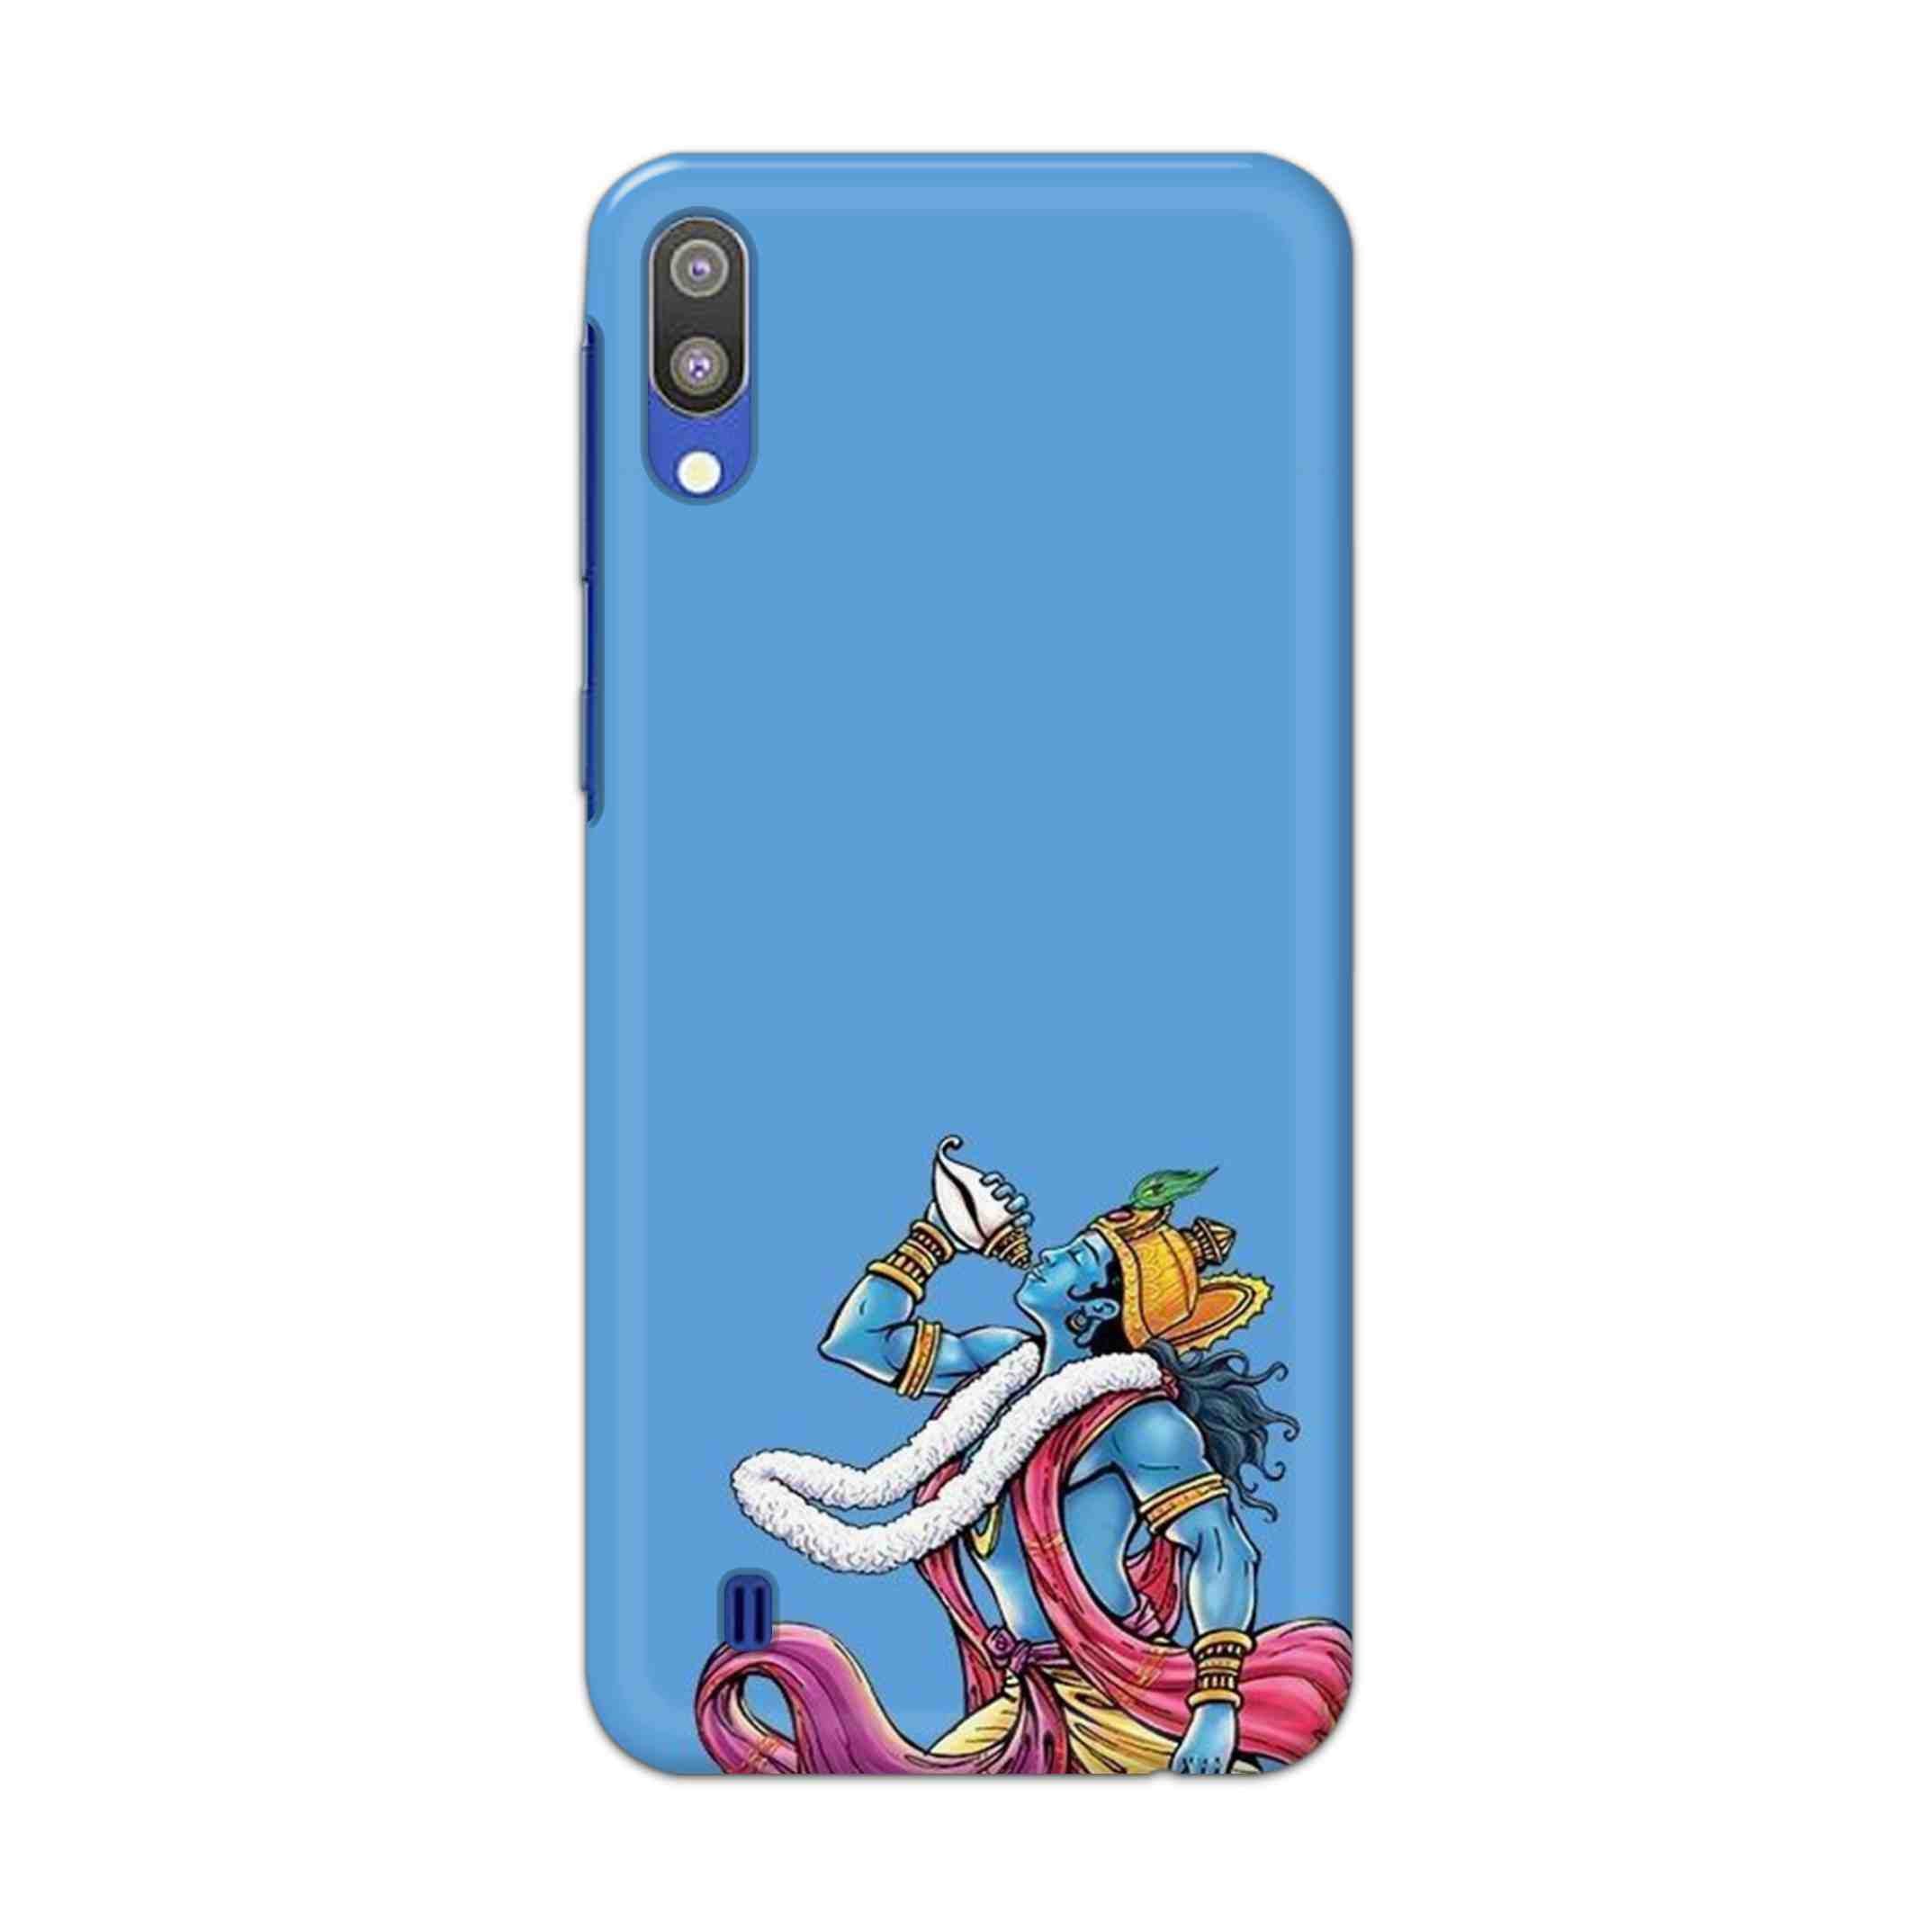 Buy Krishna Hard Back Mobile Phone Case Cover For Samsung Galaxy M10 Online